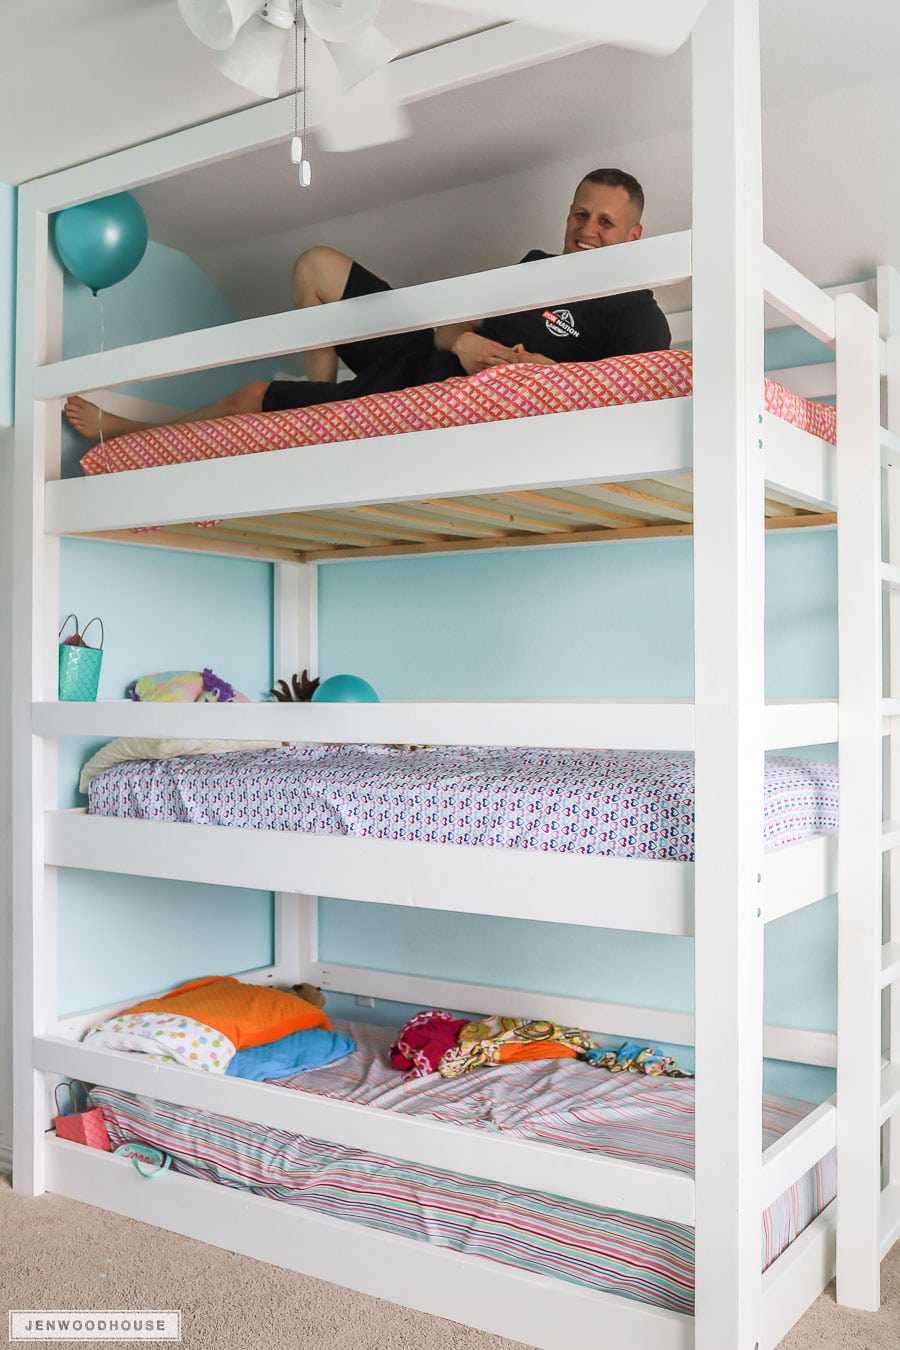 How To Build A Diy Triple Bunk Bed, How To Build A Triple Bunk Bed Step By